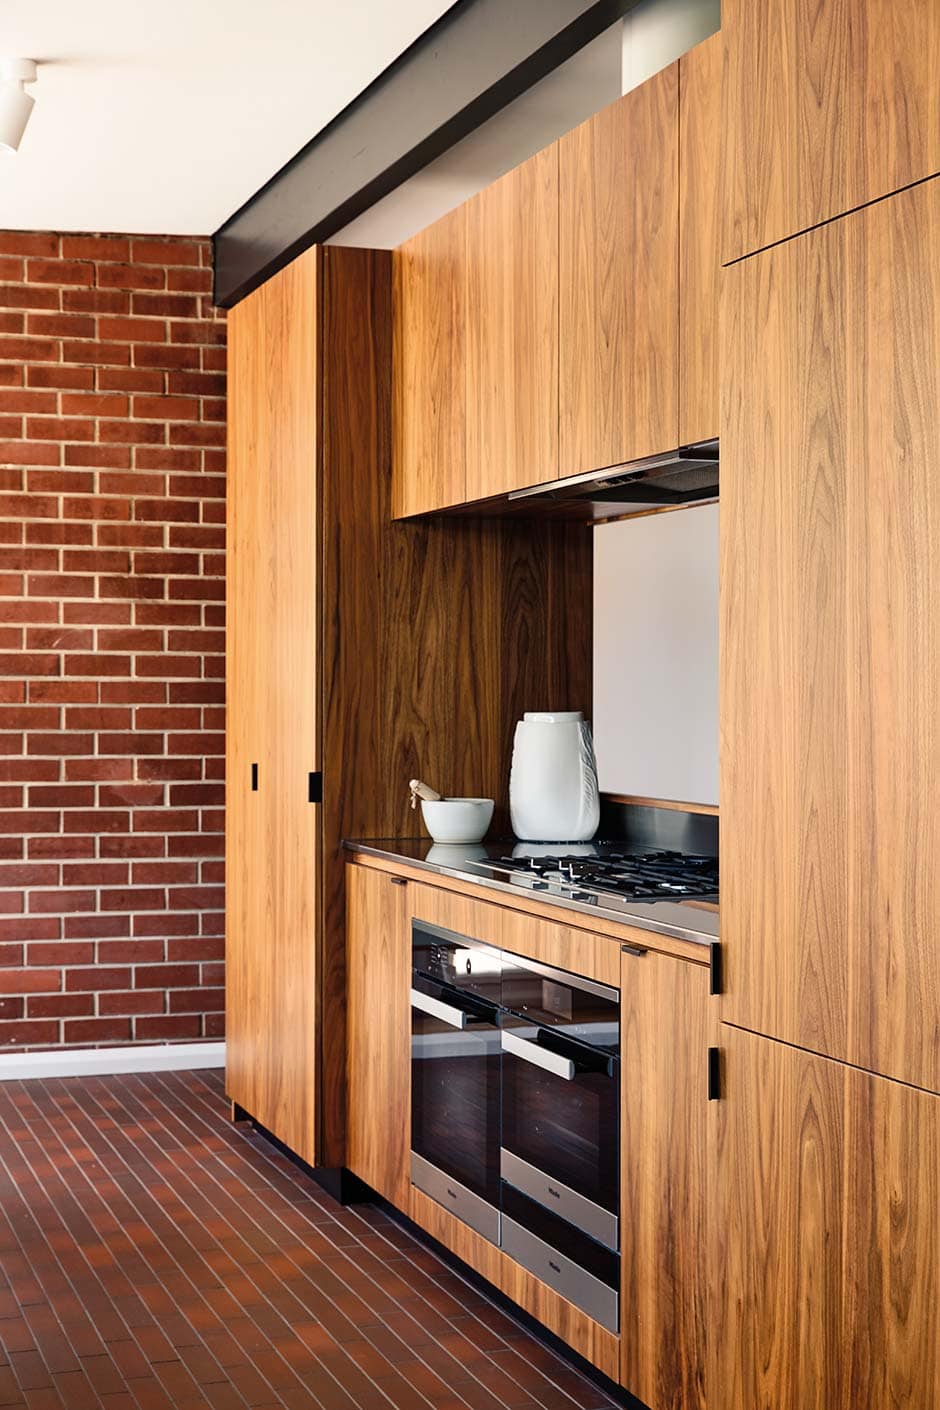 MRTN Architects’ mid-century Frankston home’s hopes have finally been fulfilled